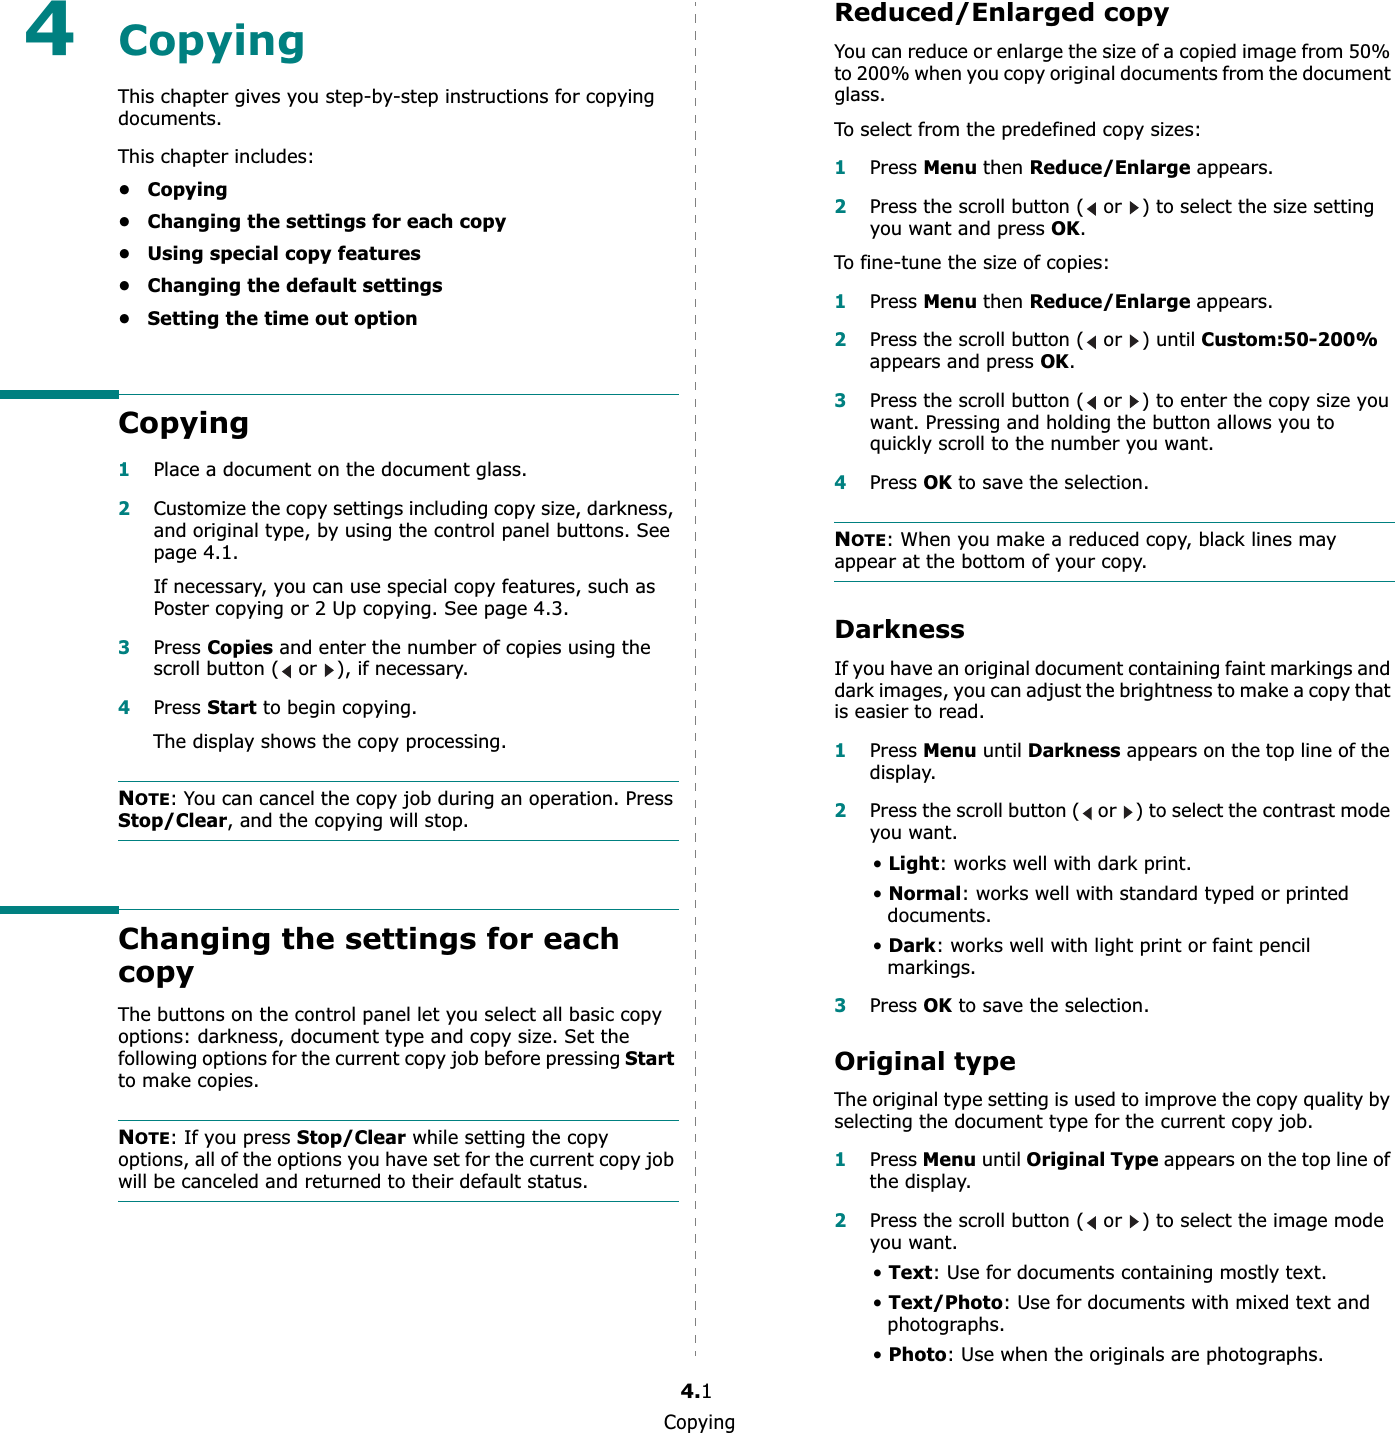 Copying4.14CopyingThis chapter gives you step-by-step instructions for copying documents.This chapter includes:•Copying• Changing the settings for each copy• Using special copy features• Changing the default settings• Setting the time out optionCopying1Place a document on the document glass.2Customize the copy settings including copy size, darkness, and original type, by using the control panel buttons. See page 4.1.If necessary, you can use special copy features, such as Poster copying or 2 Up copying. See page 4.3.3Press Copies and enter the number of copies using the scroll button (  or  ), if necessary.4Press Start to begin copying. The display shows the copy processing.NOTE: You can cancel the copy job during an operation. Press Stop/Clear, and the copying will stop.Changing the settings for each copyThe buttons on the control panel let you select all basic copy options: darkness, document type and copy size. Set the following options for the current copy job before pressing Start to make copies.NOTE: If you press Stop/Clear while setting the copy options, all of the options you have set for the current copy job will be canceled and returned to their default status.Reduced/Enlarged copyYou can reduce or enlarge the size of a copied image from 50% to 200% when you copy original documents from the document glass.To select from the predefined copy sizes:1Press Menuthen Reduce/Enlarge appears. 2Press the scroll button (  or  ) to select the size setting you want and press OK.To fine-tune the size of copies:1Press Menuthen Reduce/Enlargeappears. 2Press the scroll button (  or  ) until Custom:50-200%appears and press OK.3Press the scroll button (  or  ) to enter the copy size you want. Pressing and holding the button allows you to quickly scroll to the number you want.4Press OK to save the selection.NOTE: When you make a reduced copy, black lines may appear at the bottom of your copy.DarknessIf you have an original document containing faint markings and dark images, you can adjust the brightness to make a copy that is easier to read. 1Press Menu until Darkness appears on the top line of the display.2Press the scroll button (  or  ) to select the contrast mode you want.•Light: works well with dark print.•Normal: works well with standard typed or printed documents.•Dark: works well with light print or faint pencil markings.3Press OK to save the selection.Original typeThe original type setting is used to improve the copy quality by selecting the document type for the current copy job. 1Press Menu until Original Type appears on the top line of the display.2Press the scroll button (  or  ) to select the image mode you want.•Text: Use for documents containing mostly text.•Text/Photo: Use for documents with mixed text and photographs.•Photo: Use when the originals are photographs.